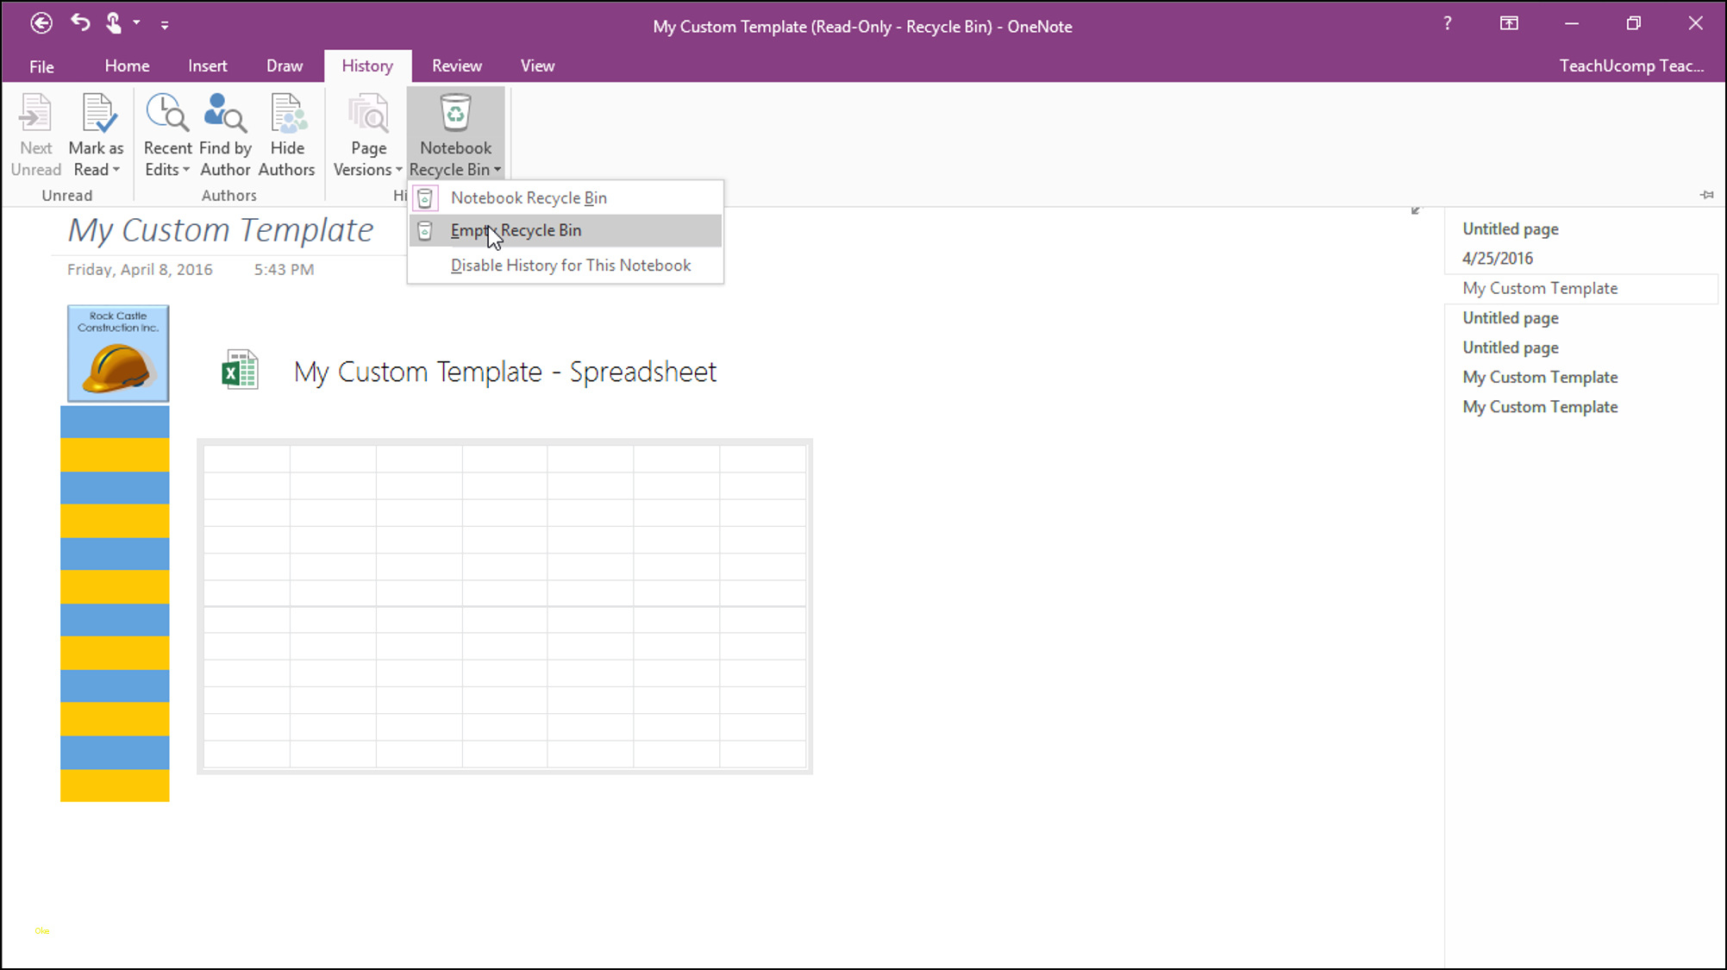 onenote project plan template